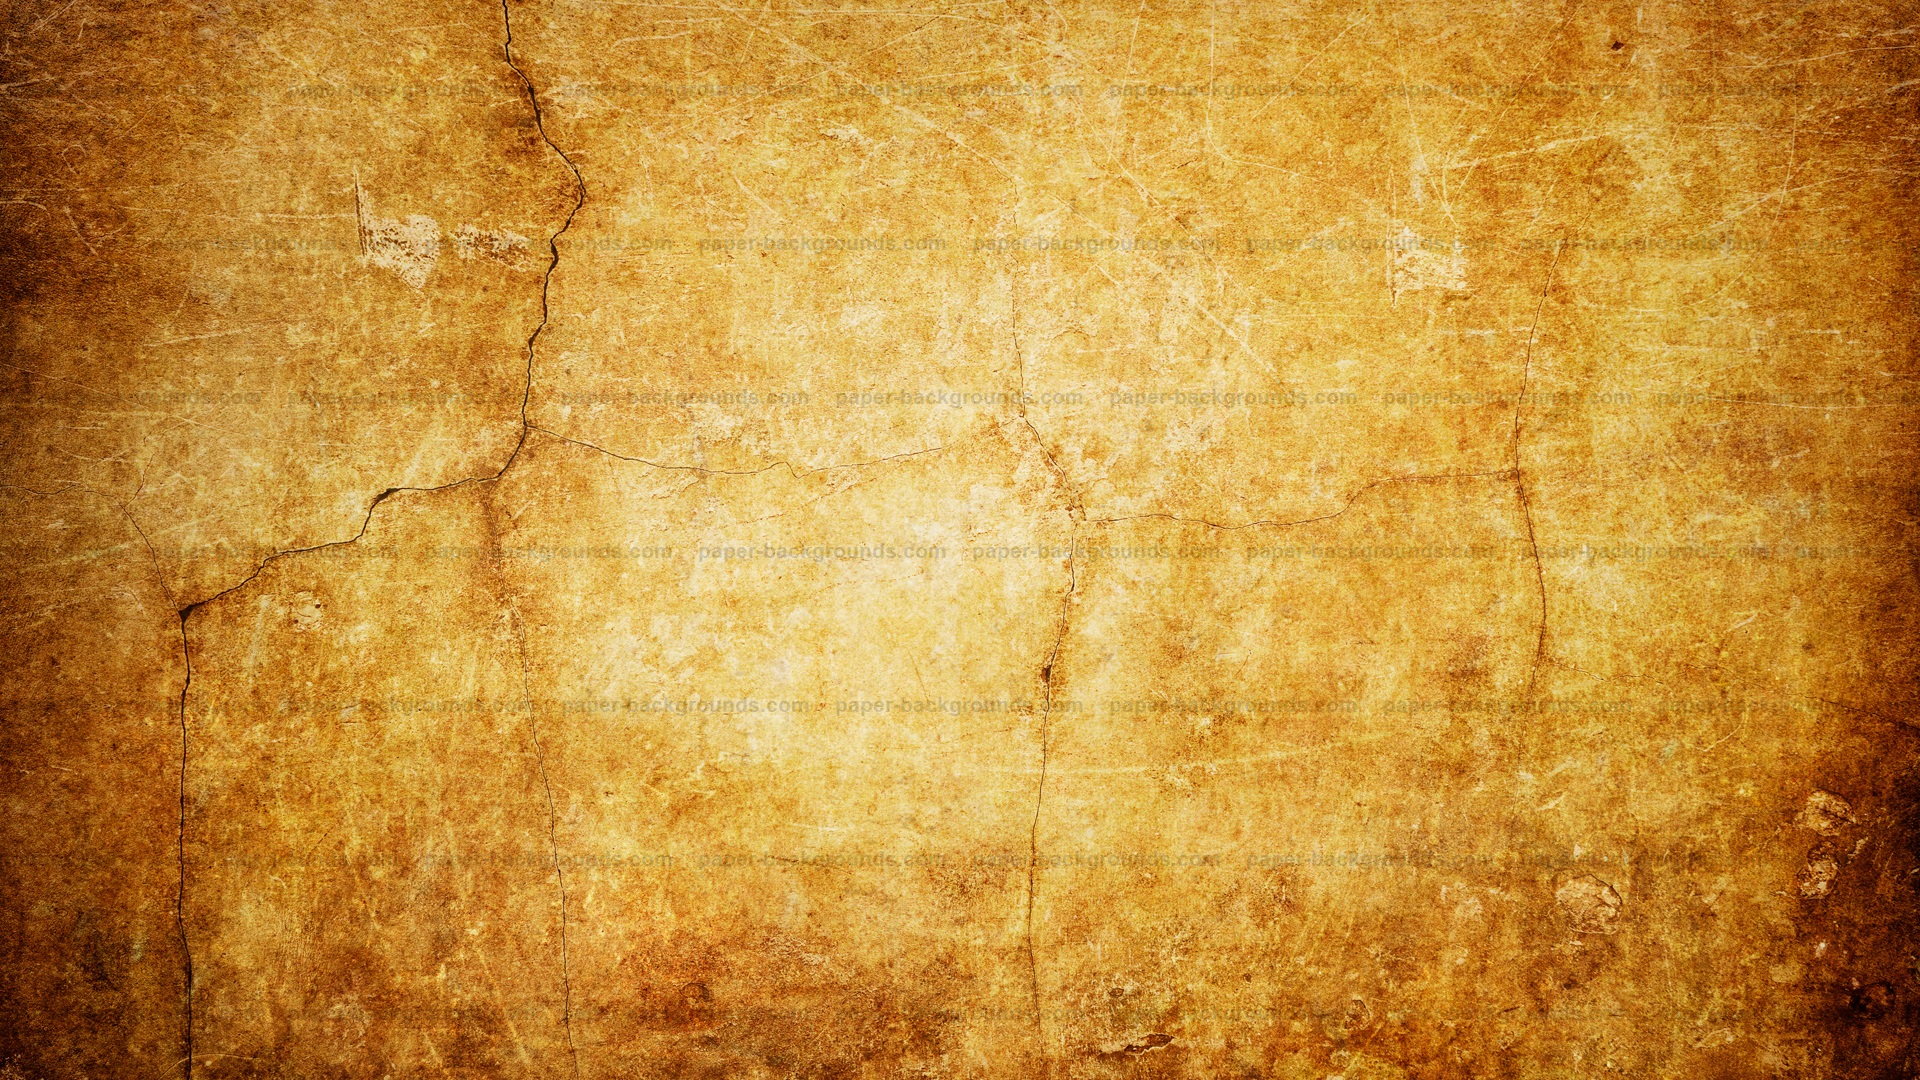 Paper Backgrounds vintage wall texture background hd